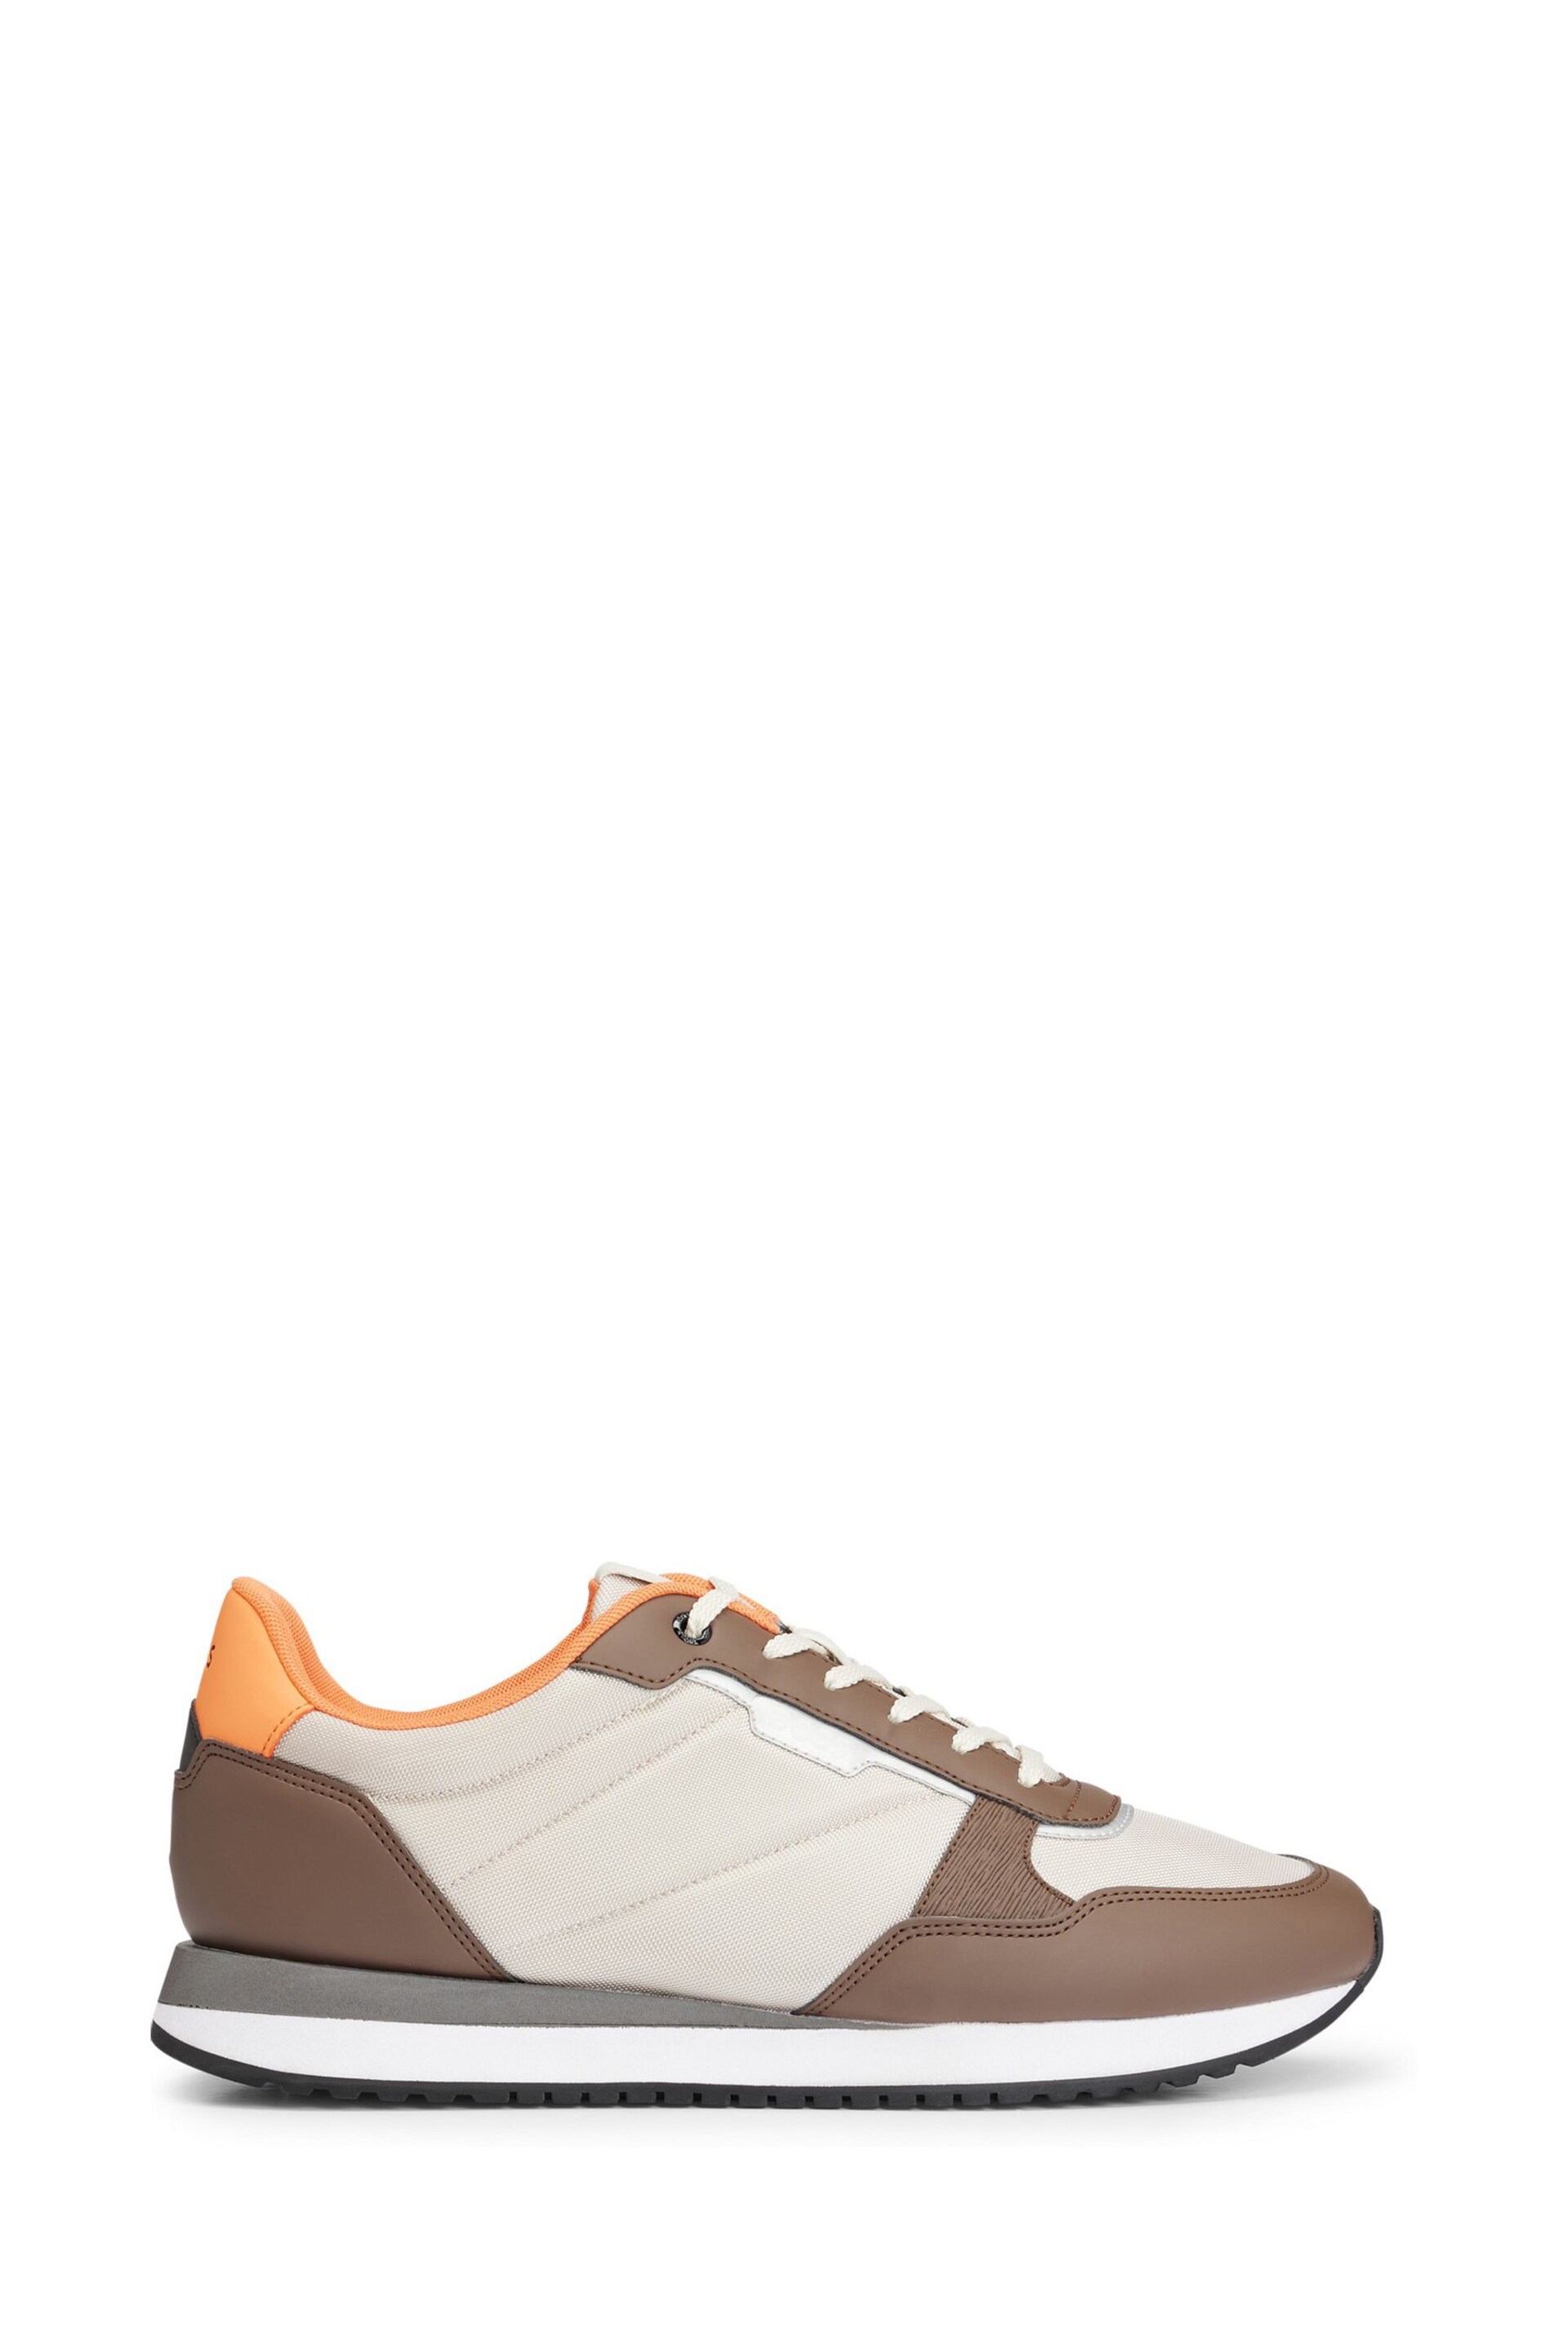 BOSS Brown Mixed-Material Trainers With Pop-Colour Details - Image 1 of 5